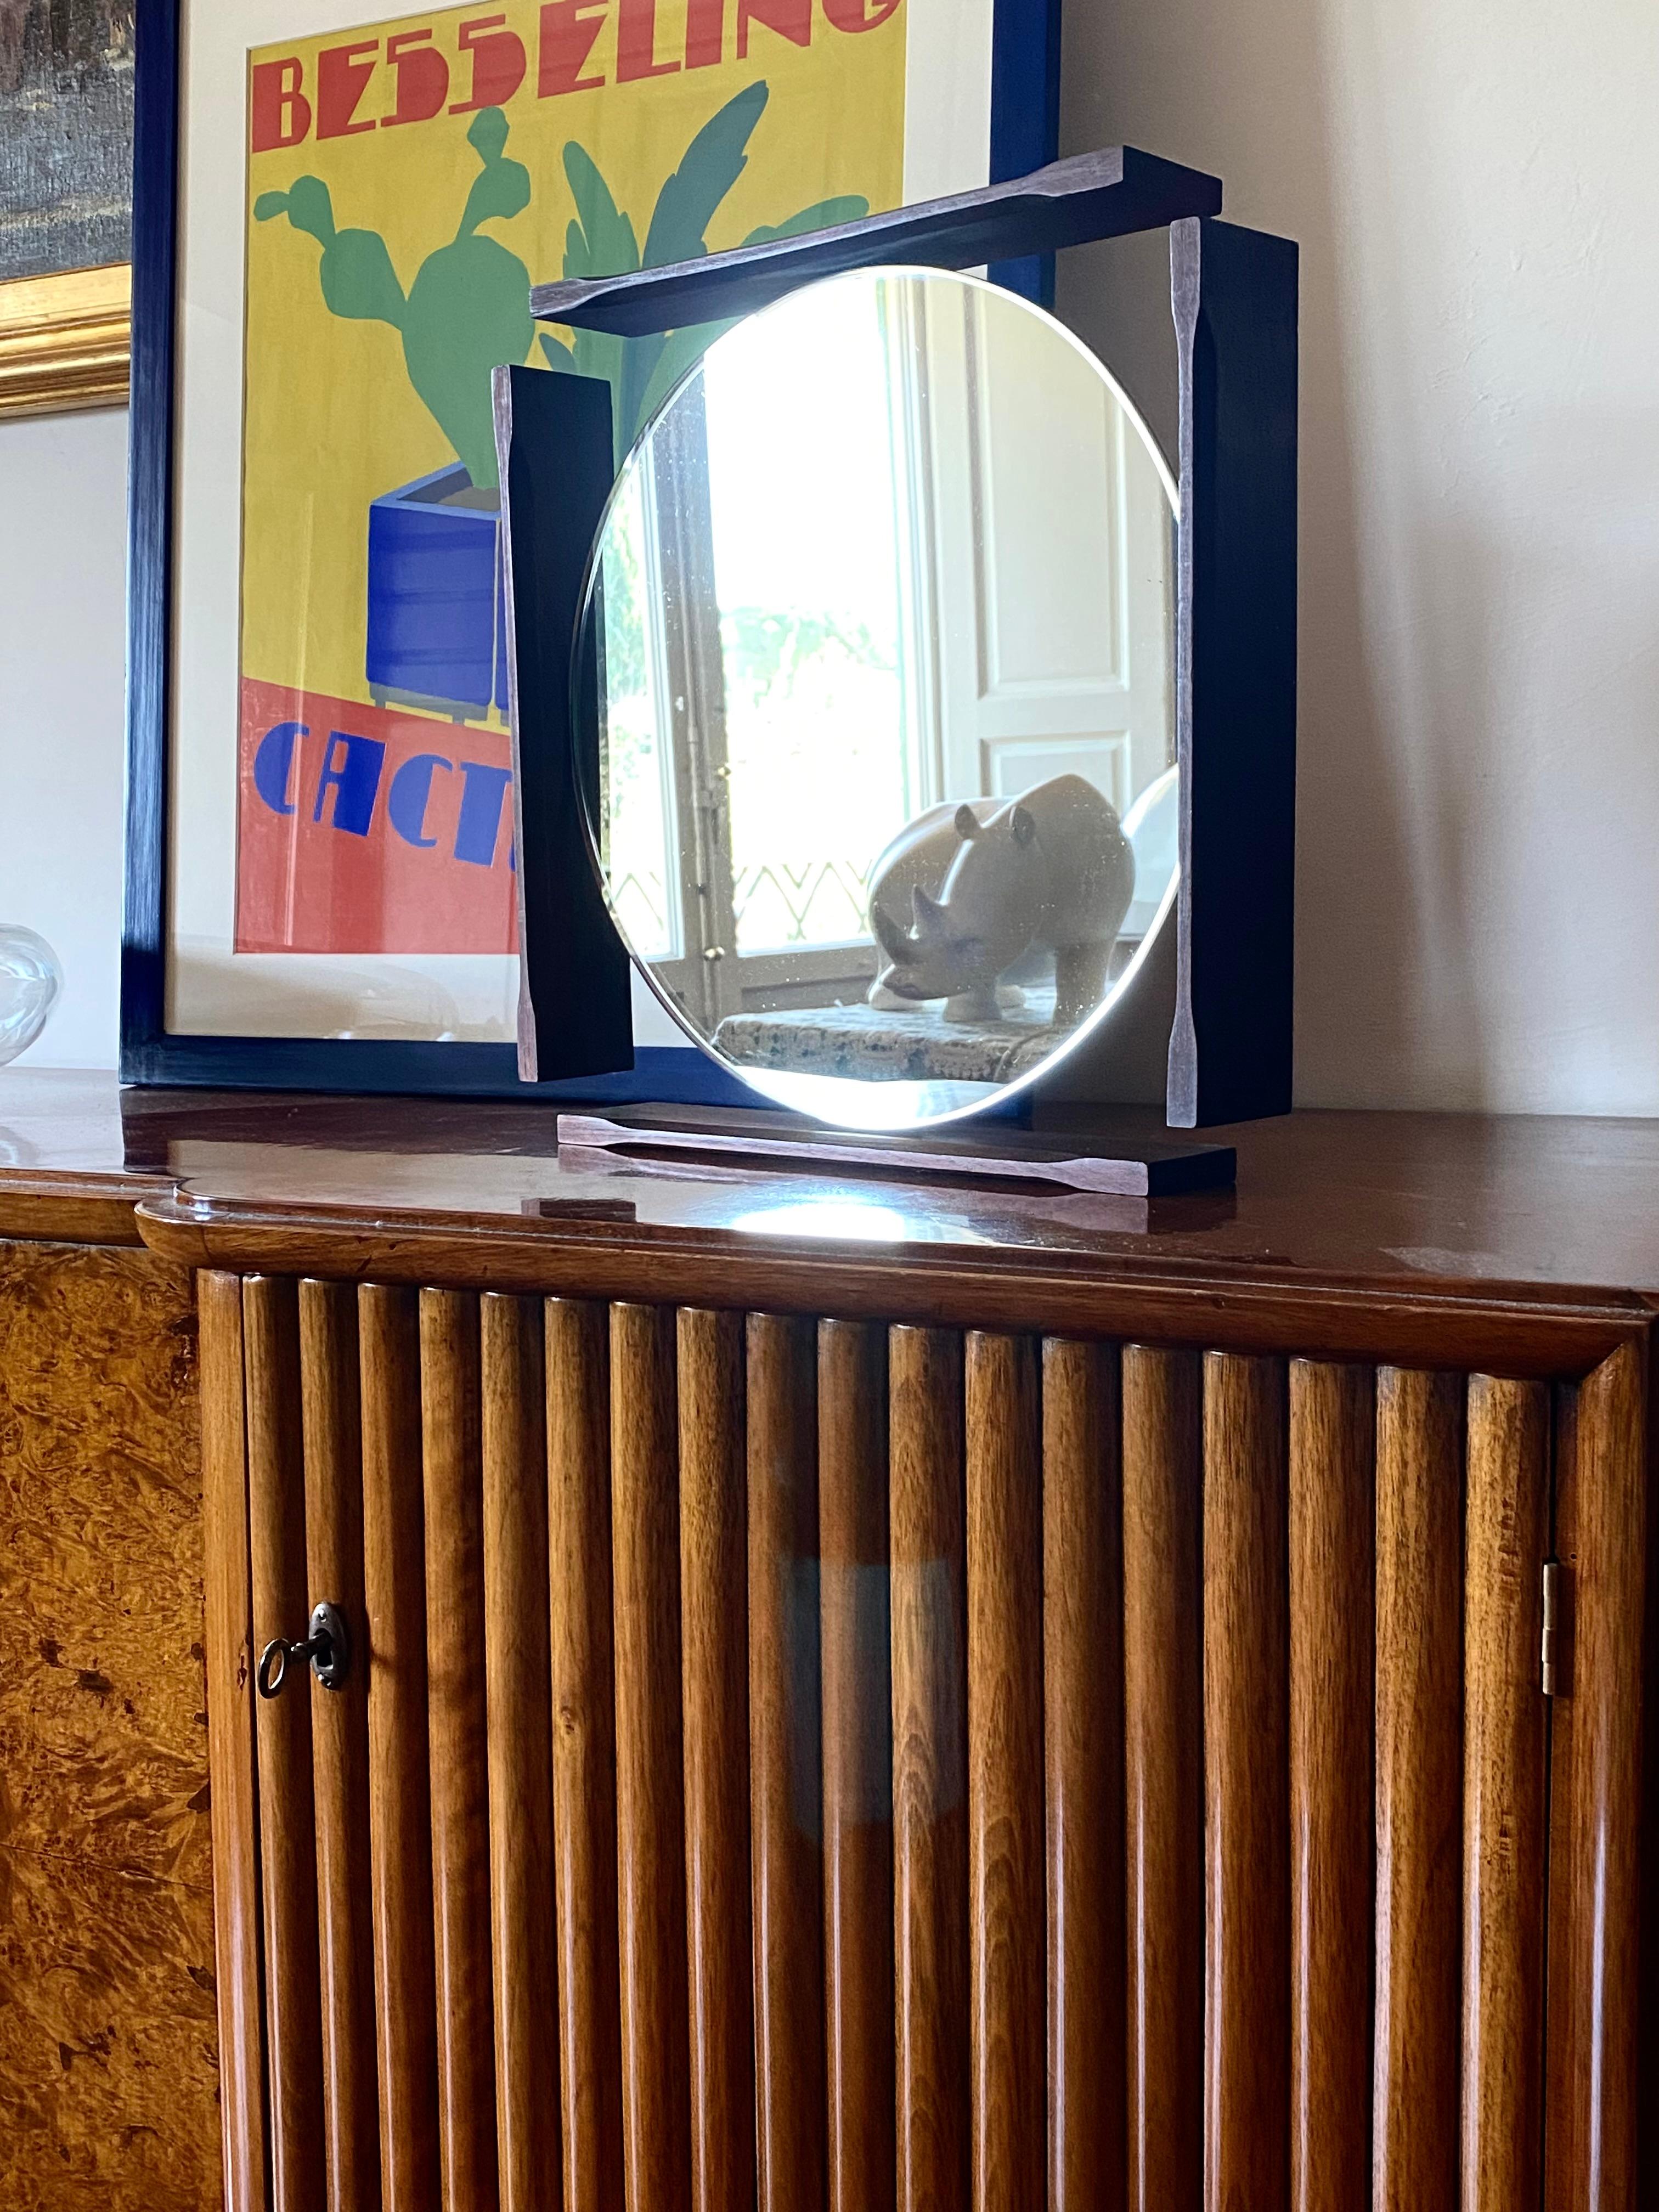 Mid-century table / wall mirror / vanity

Italy 1970s

teak wood, glass

40 cm x 40 x 6,5 cm

Conditions: excellent consistent with age and use